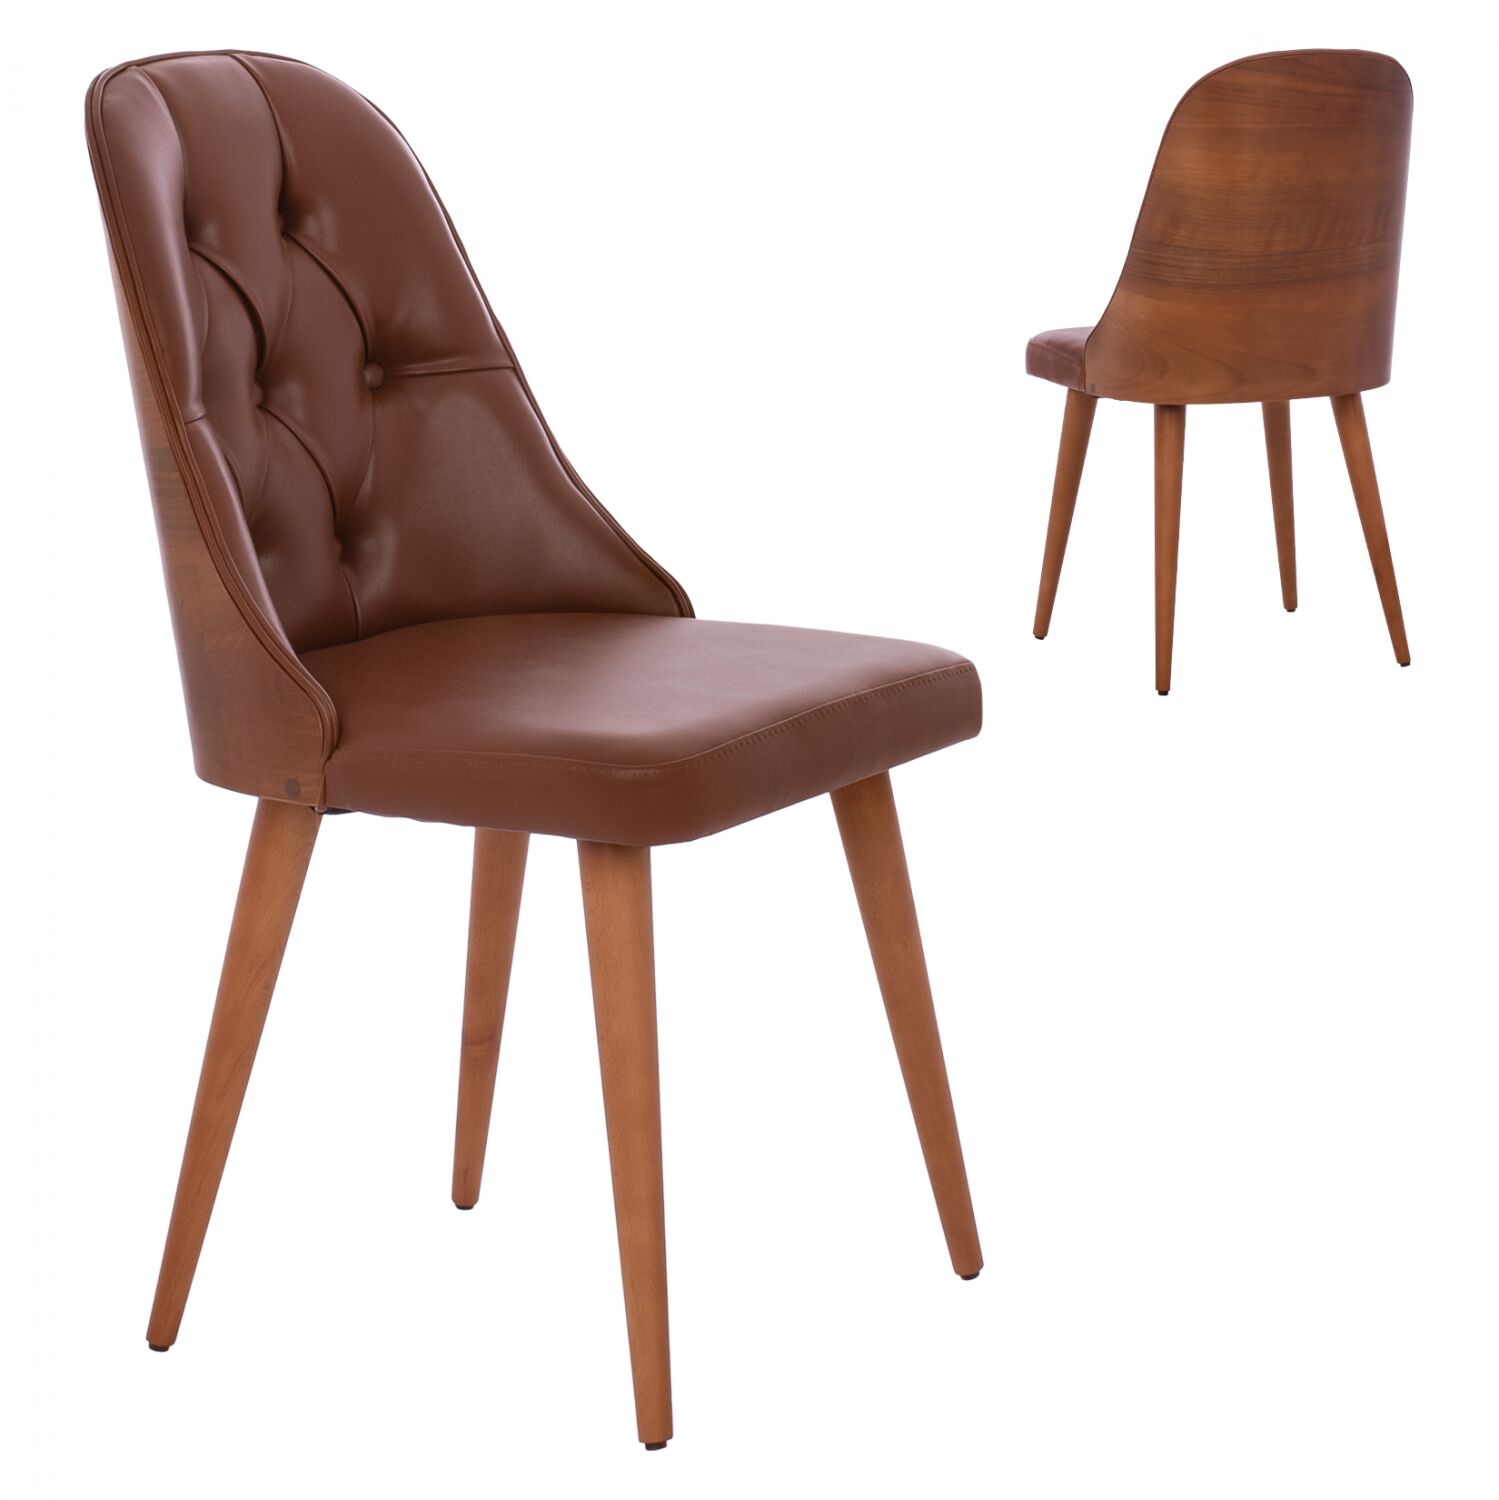 CHAIR PROFESSIONAL “ESTRELLA” HM9270.43 TAN BROWN PU LEATHER & WOODEN BACK IN WALNUT COLOR 47x60x92H CM.